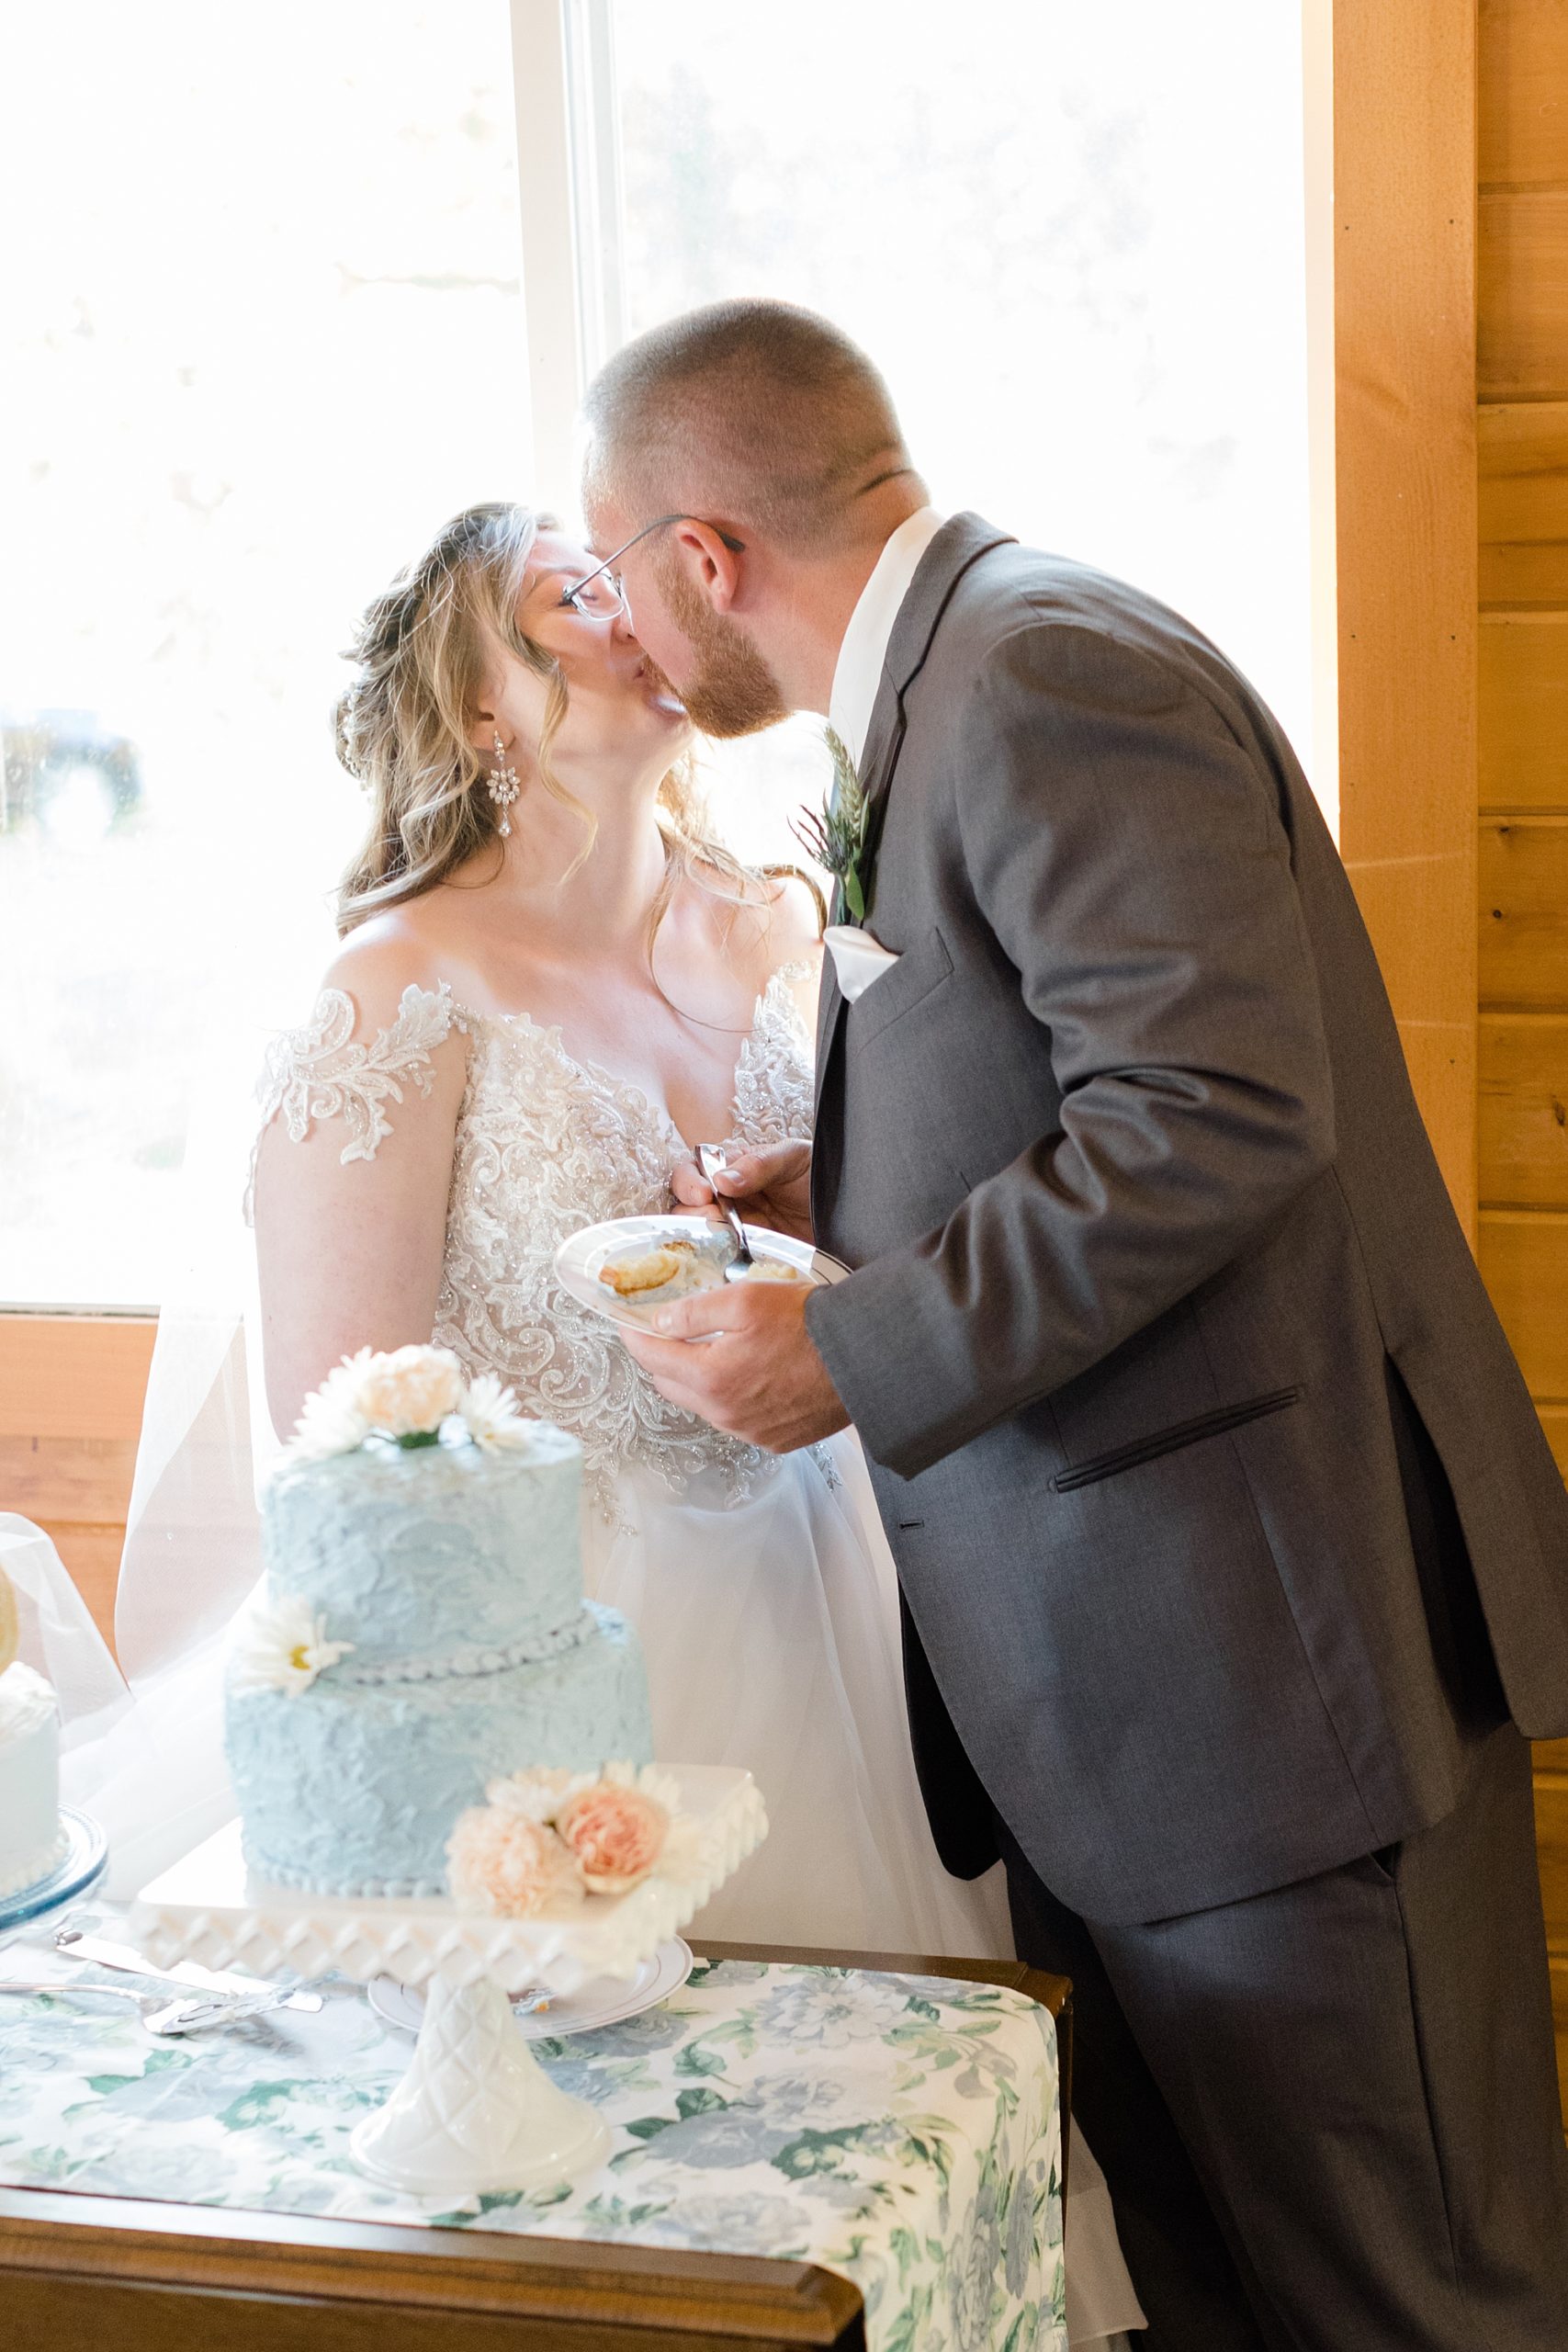 couple kisses by blue wedding cake at rustic New York wedding reception